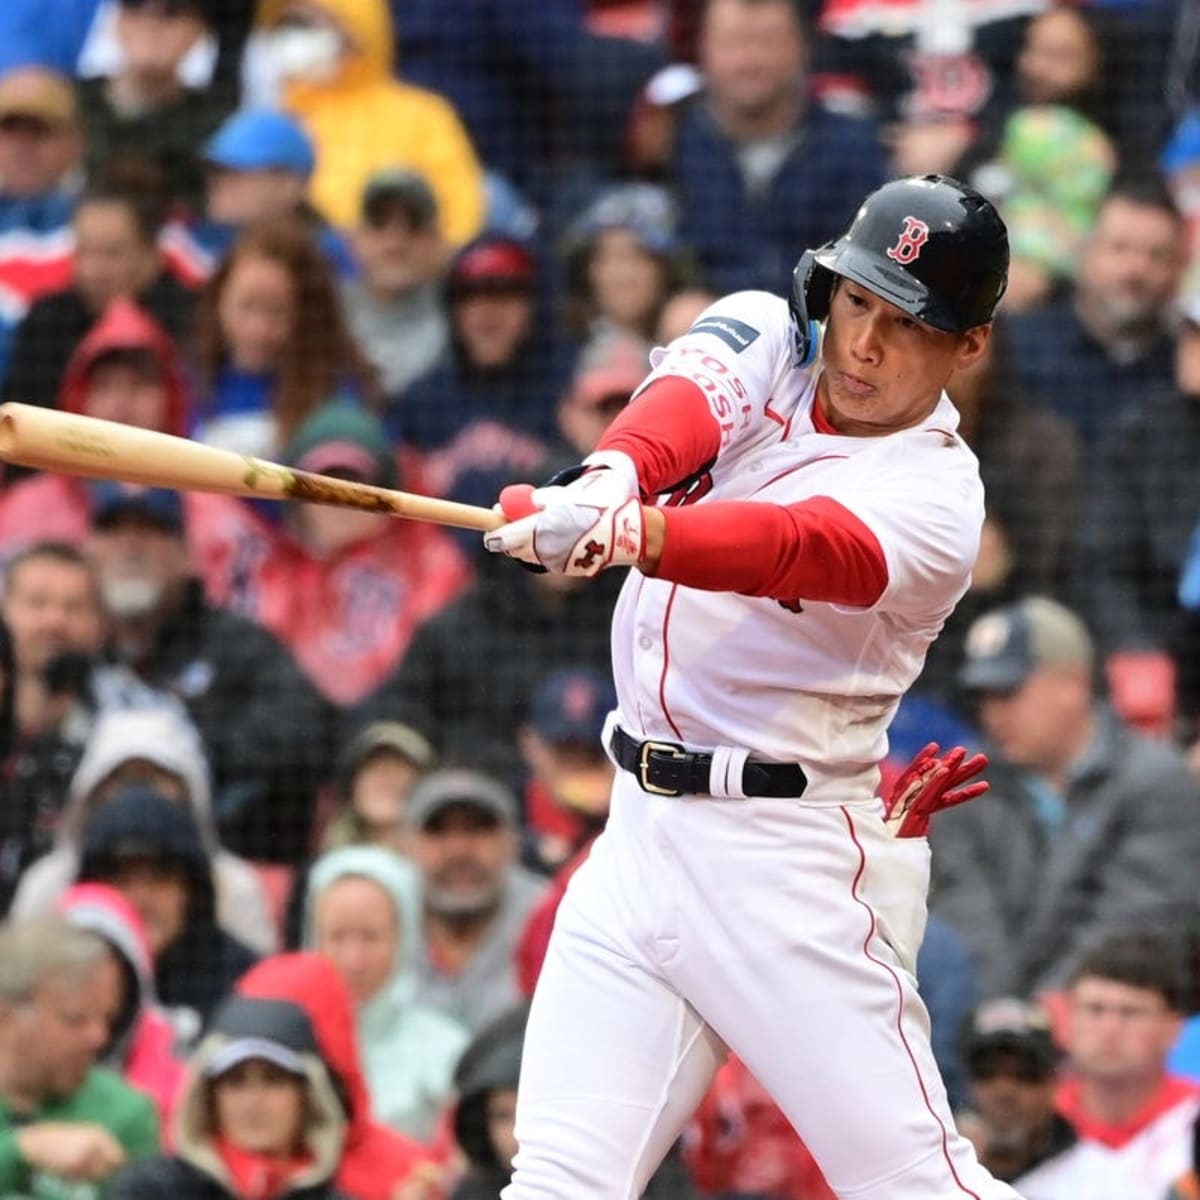 Watch Colorado Rockies at Boston Red Sox Stream MLB live, TV channel - How to Watch and Stream Major League and College Sports